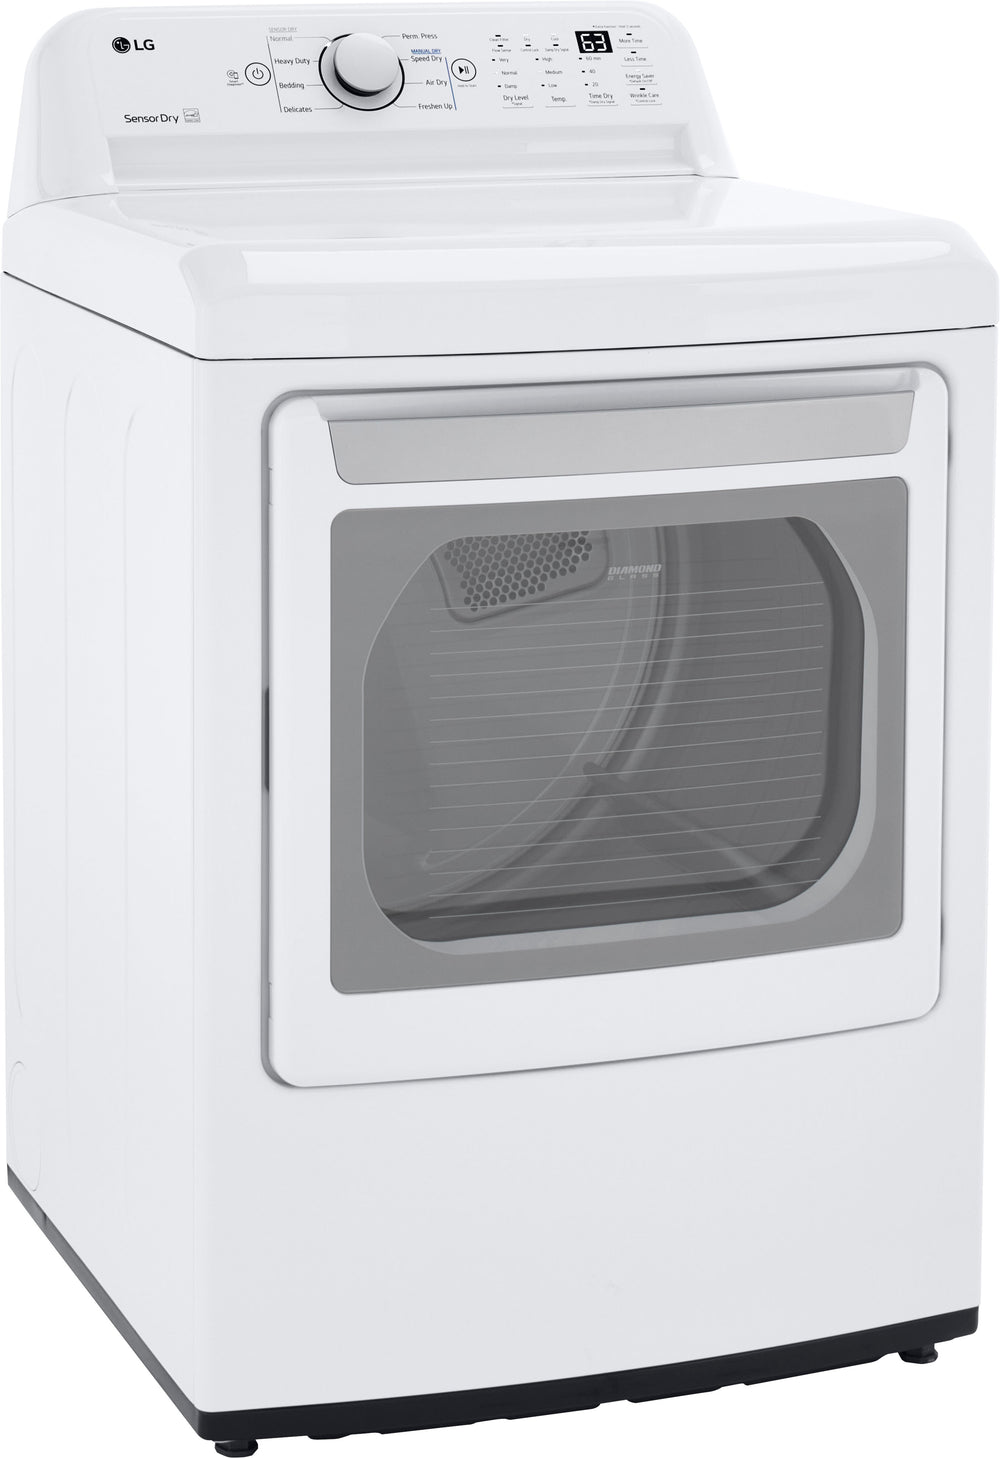 LG - 7.3 Cu Ft Electric Dryer with Sensor Dry - White_1